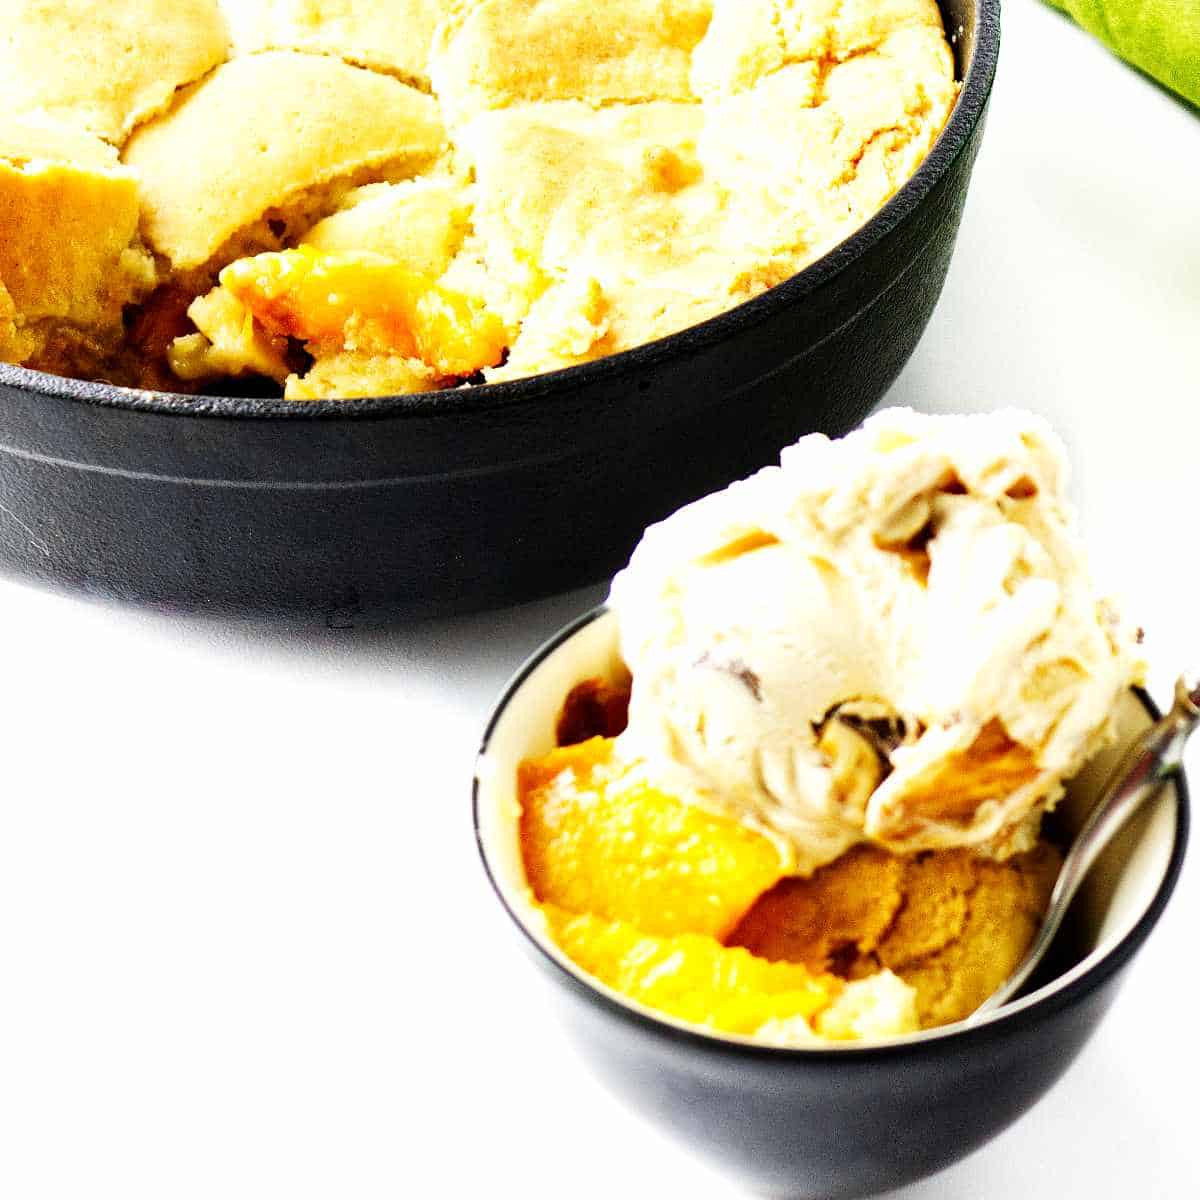 peach cobbler in a bowl with ice cream on top.